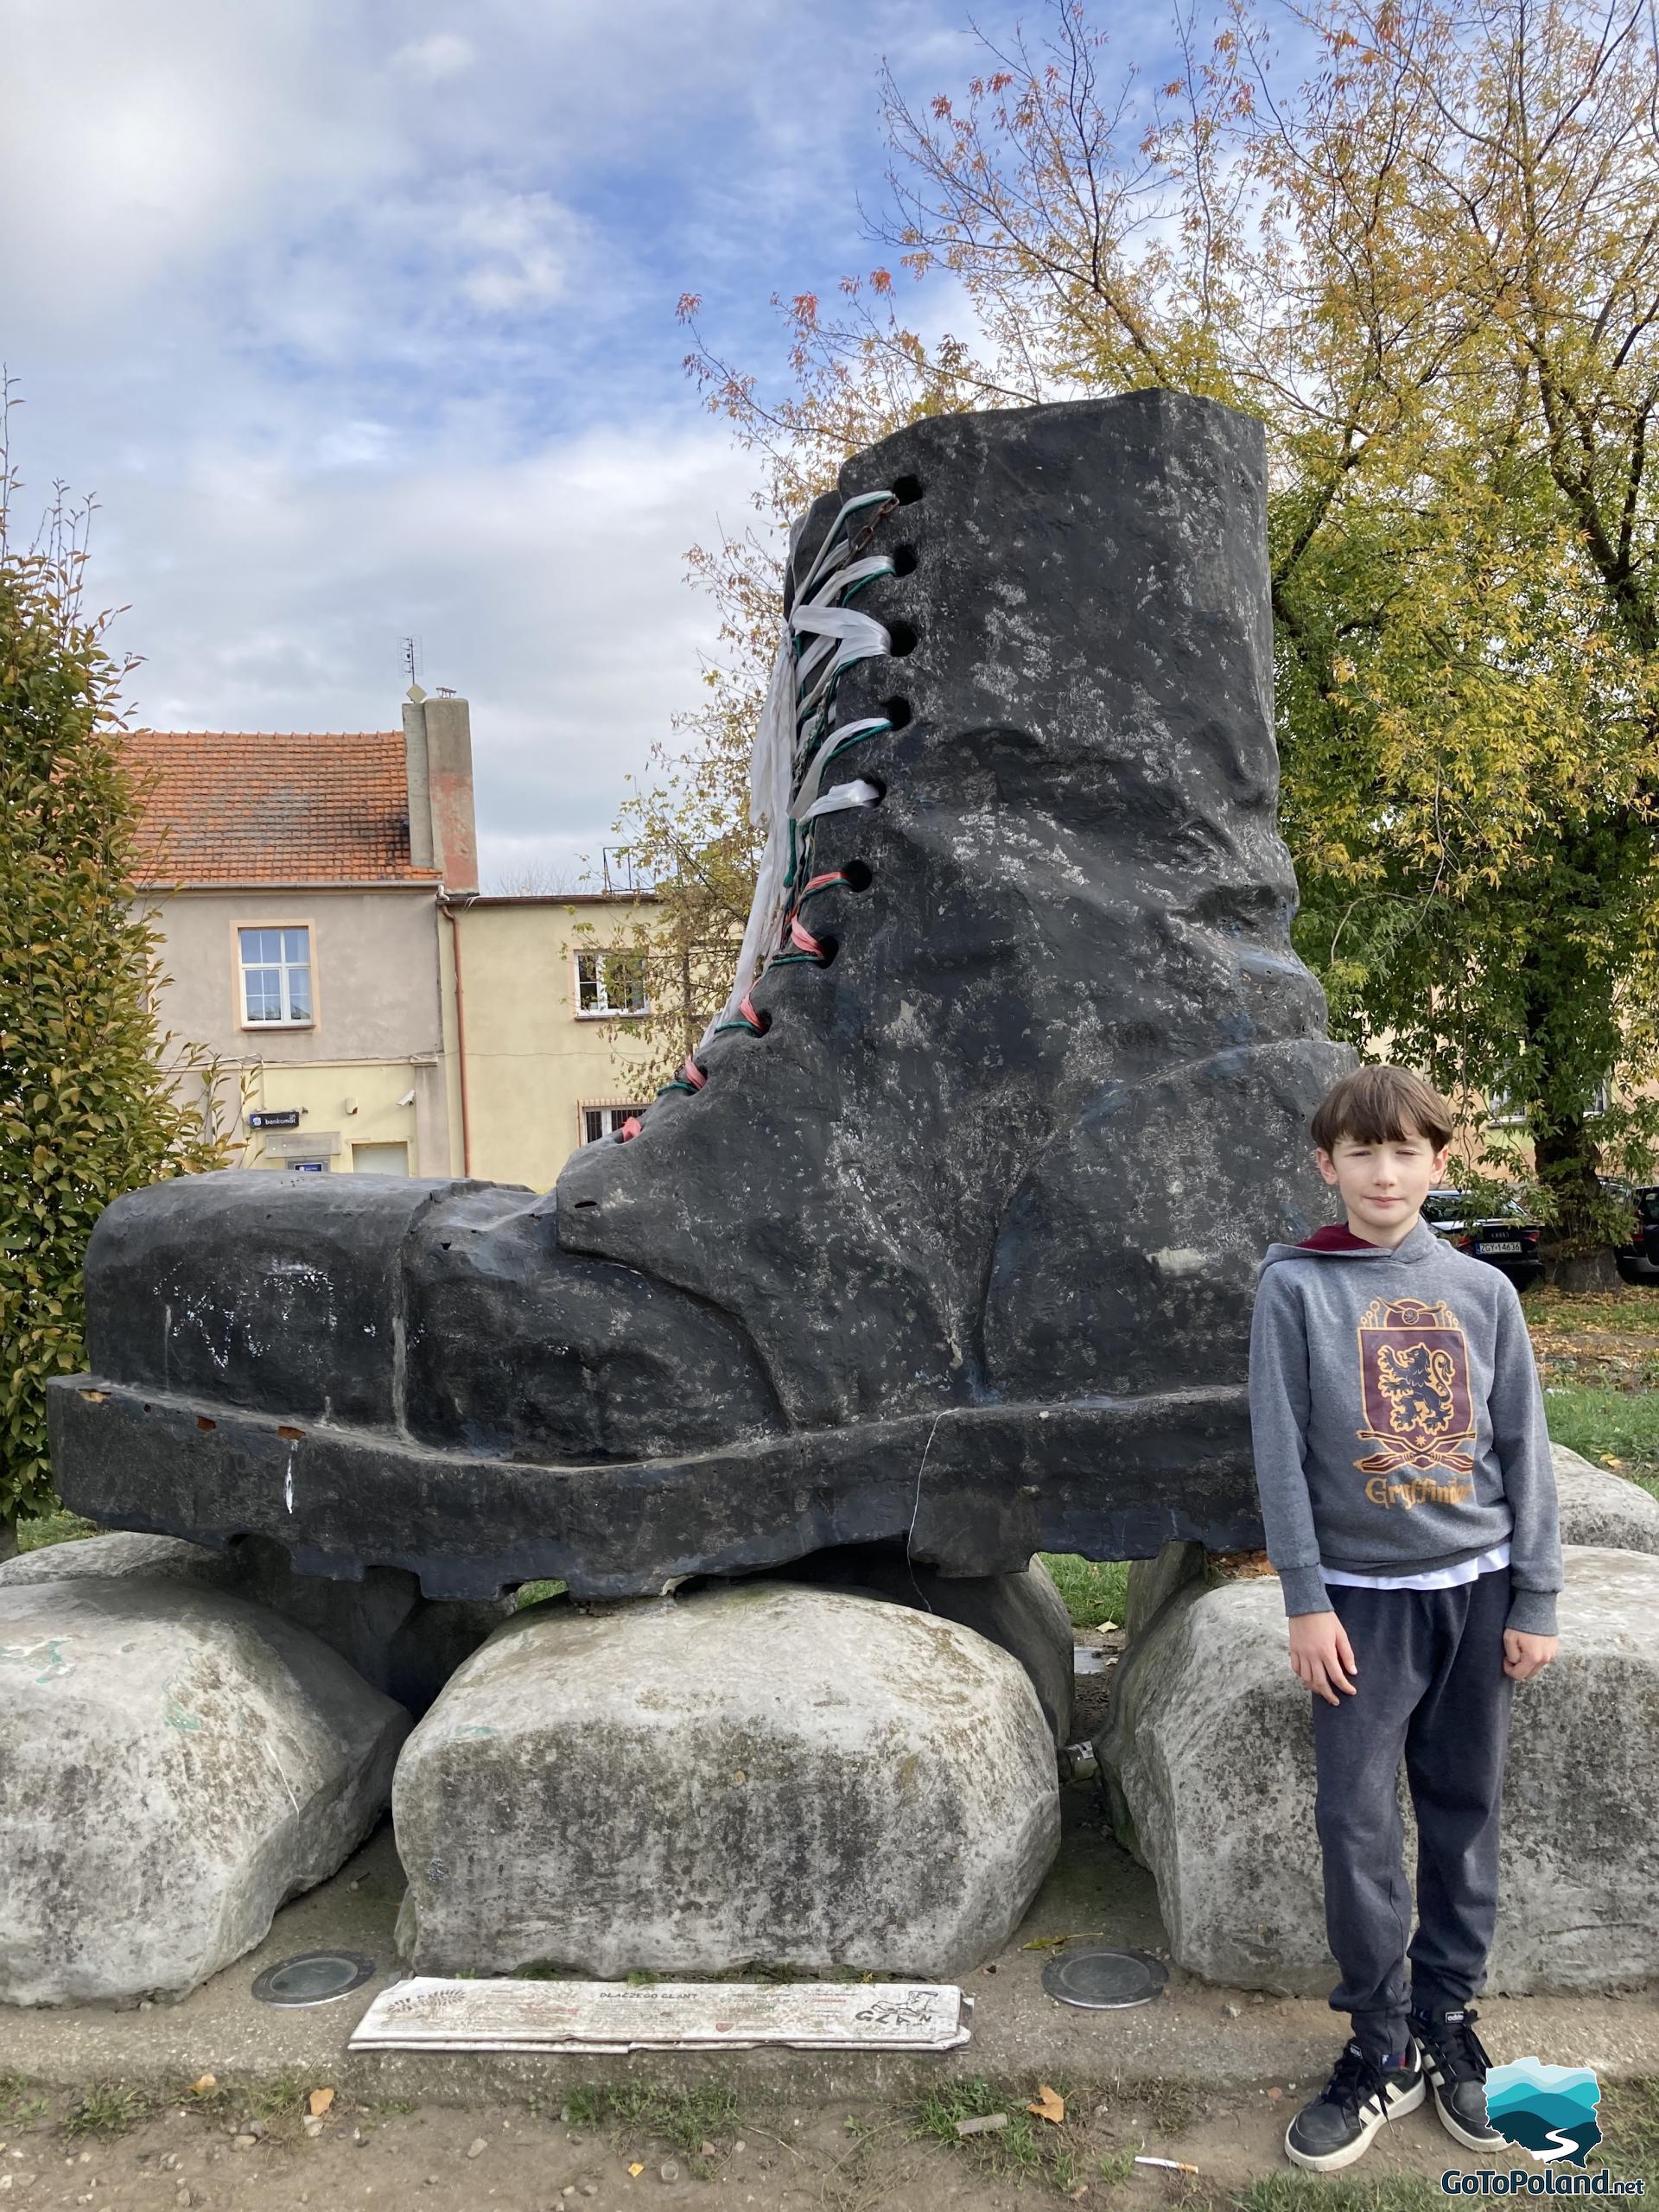 A large monument of a rock boot